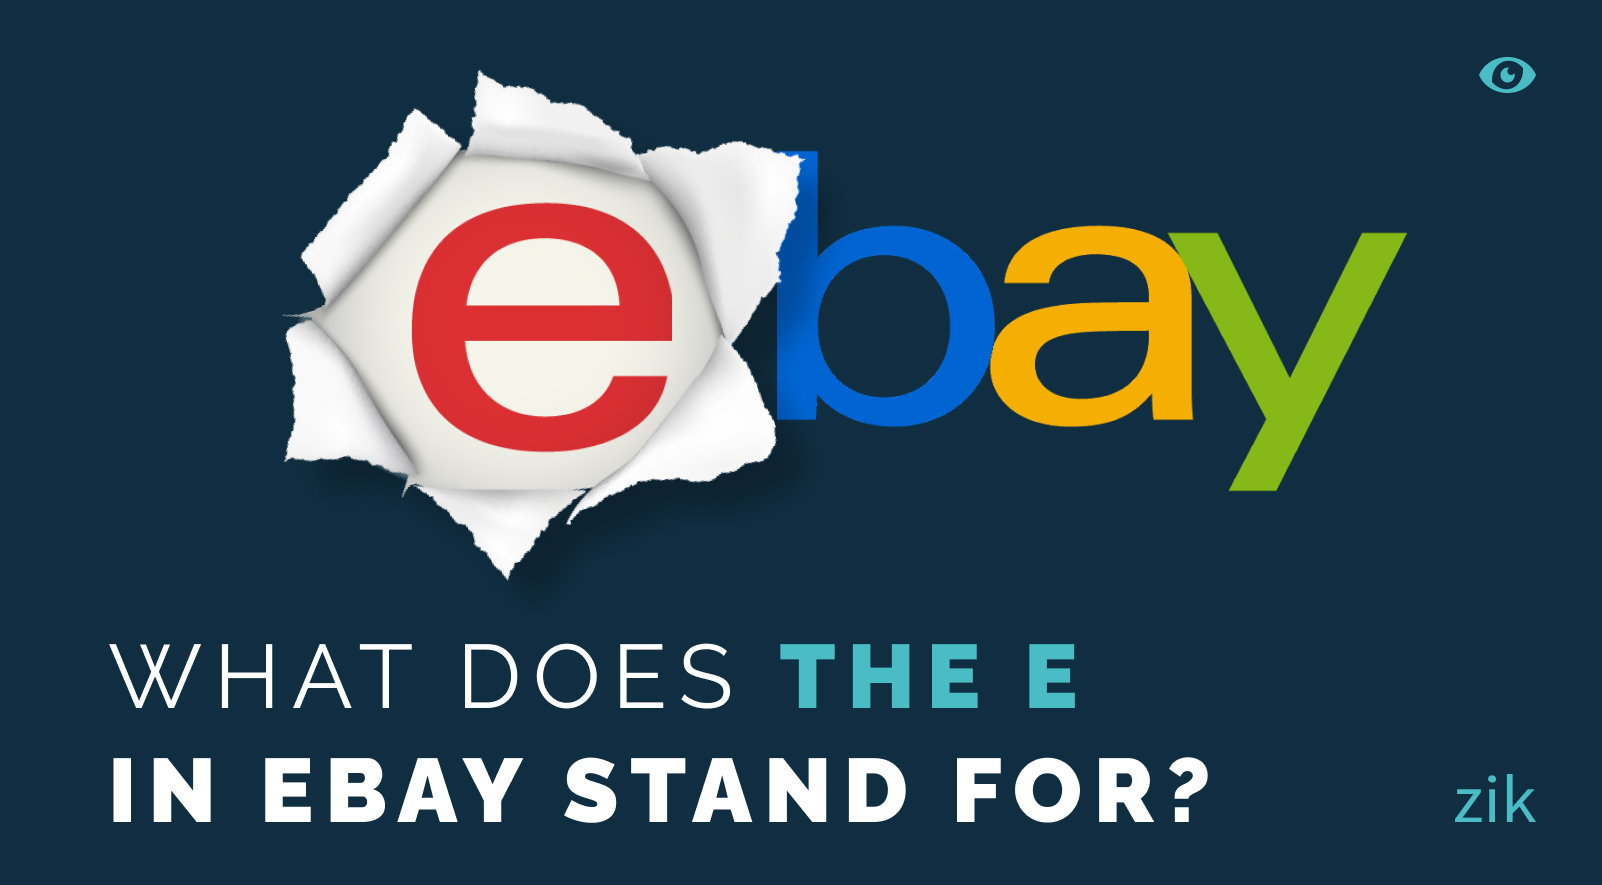 What does the e in ebay stands for